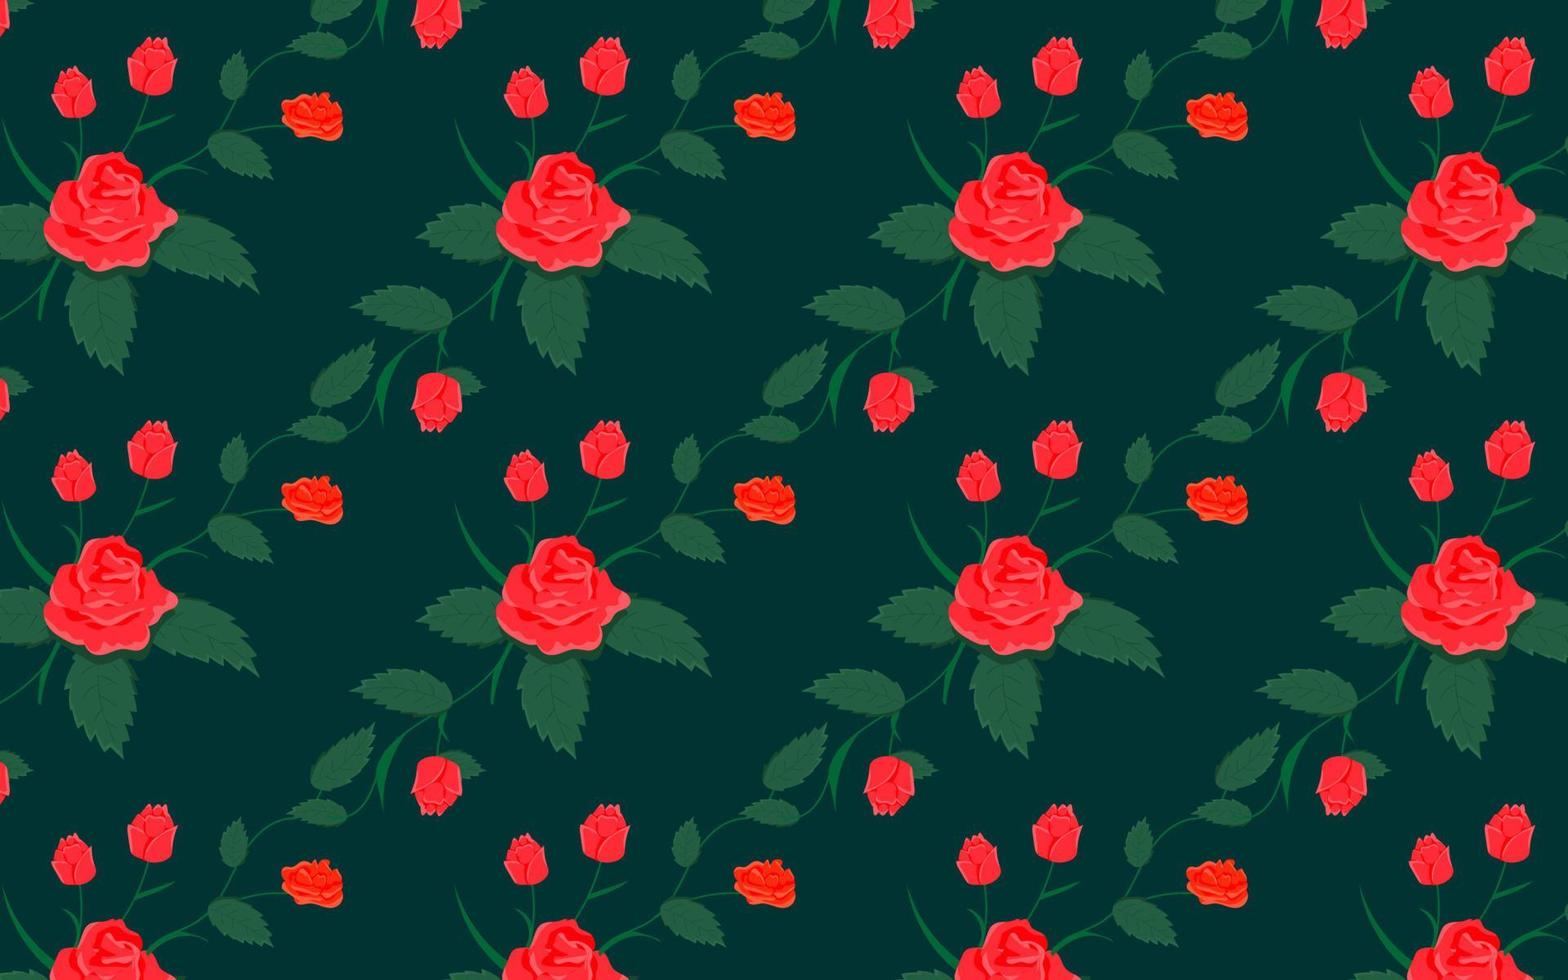 Symmetrical red rose pattern. Love iconic seamless pattern. For valentine season. Find fill pattern on swatches vector